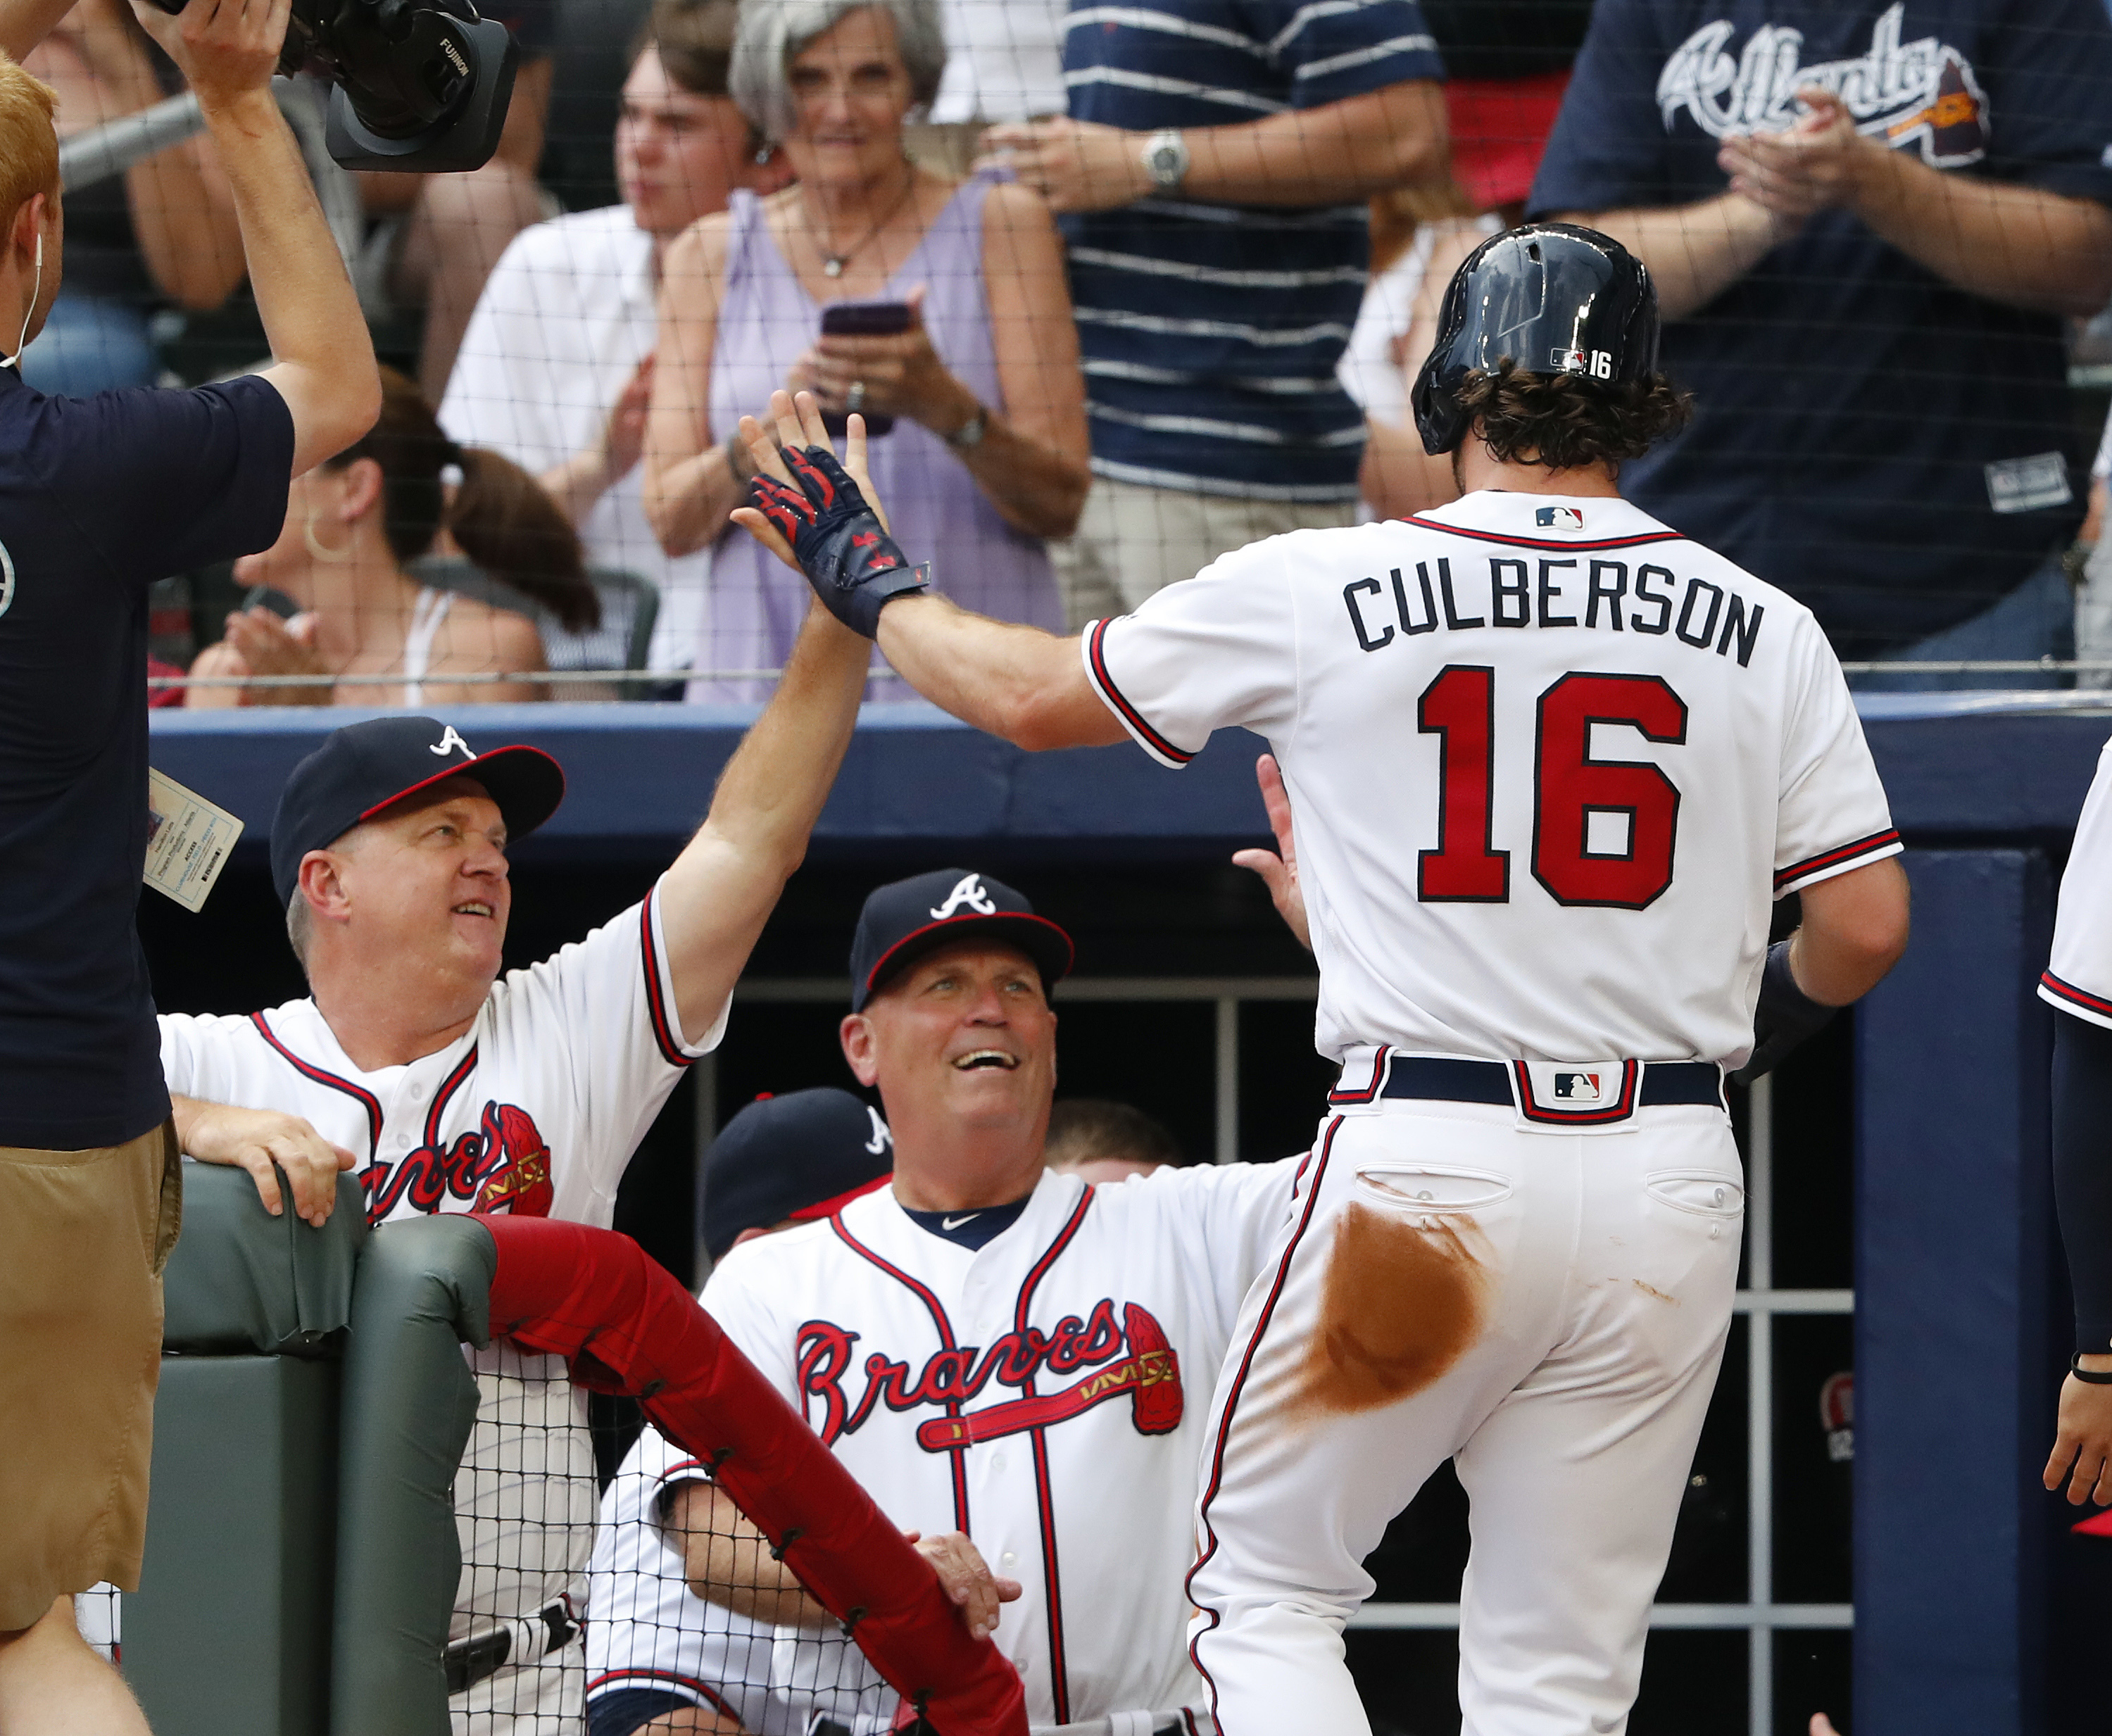 Sean Newcomb, Charlie Culberson power Braves past Padres, 1-0